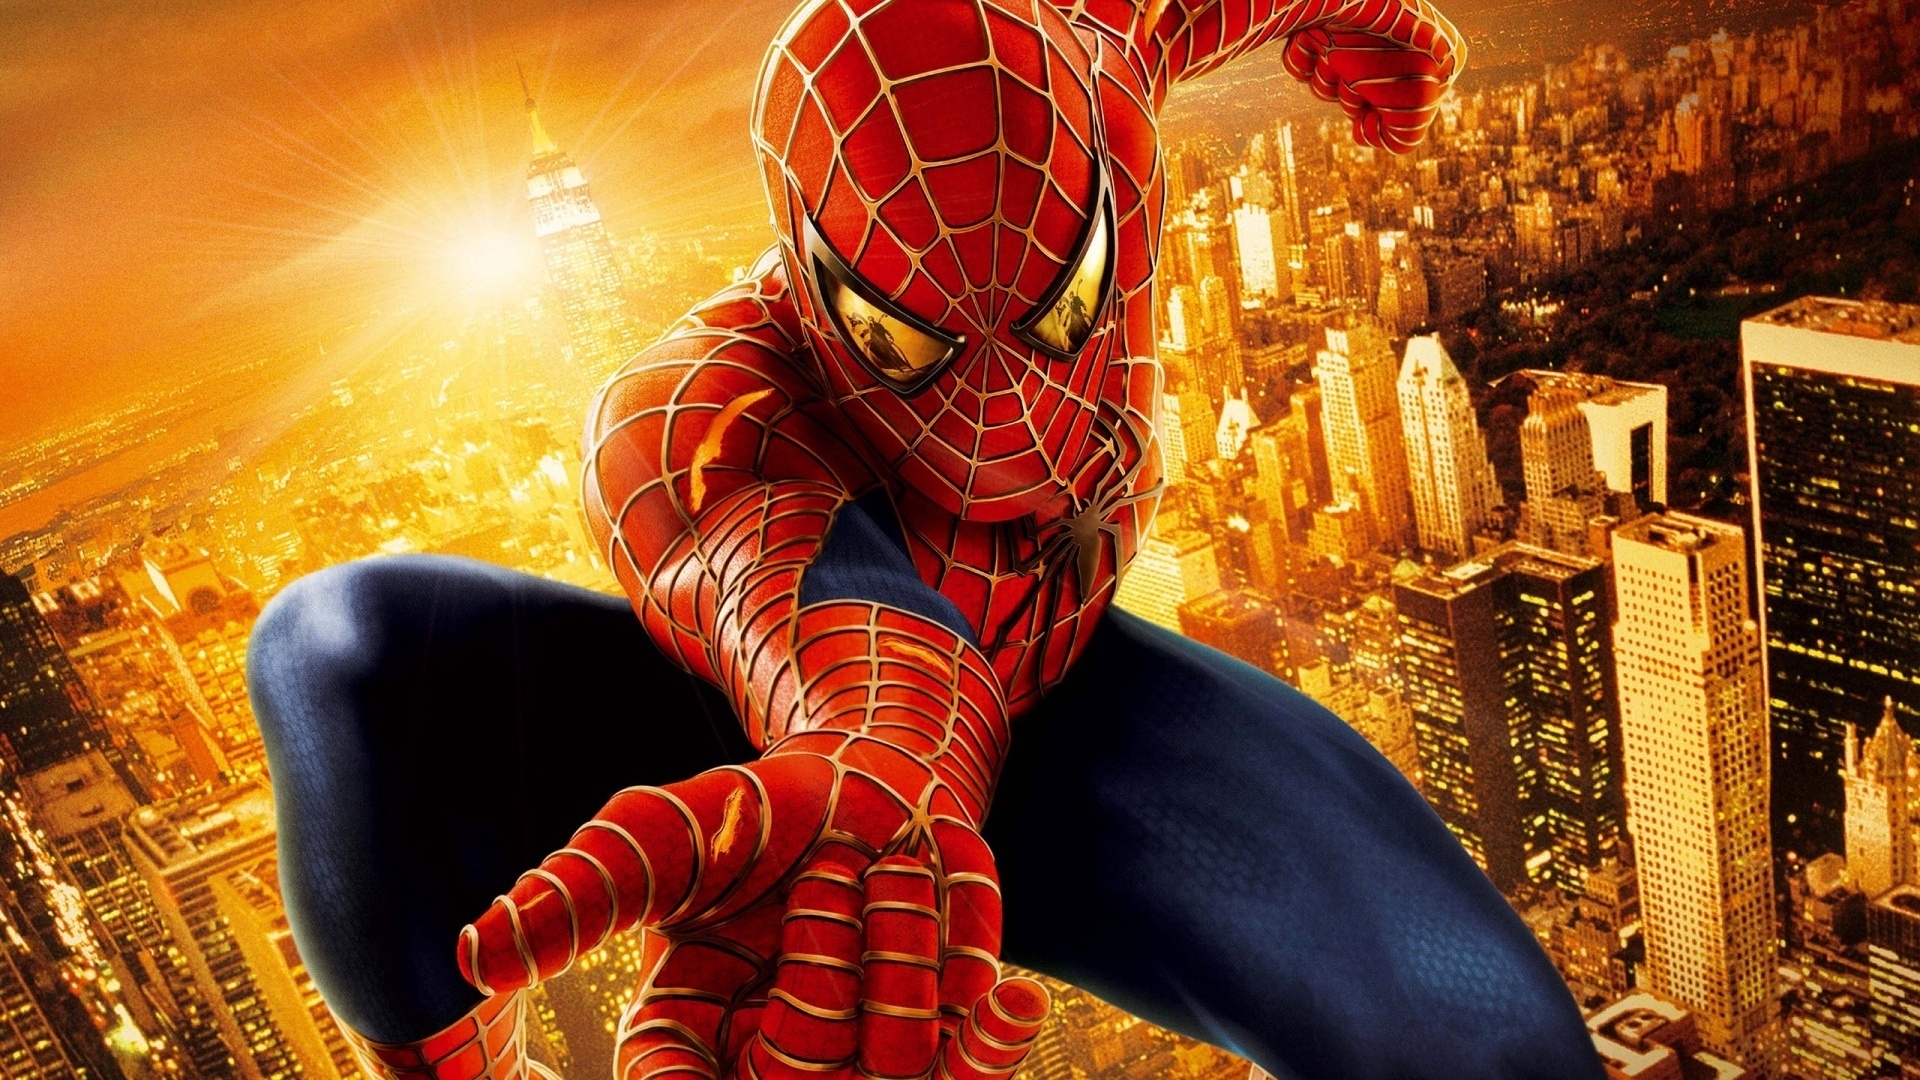 Spiderman Up for 1920 x 1080 HDTV 1080p resolution